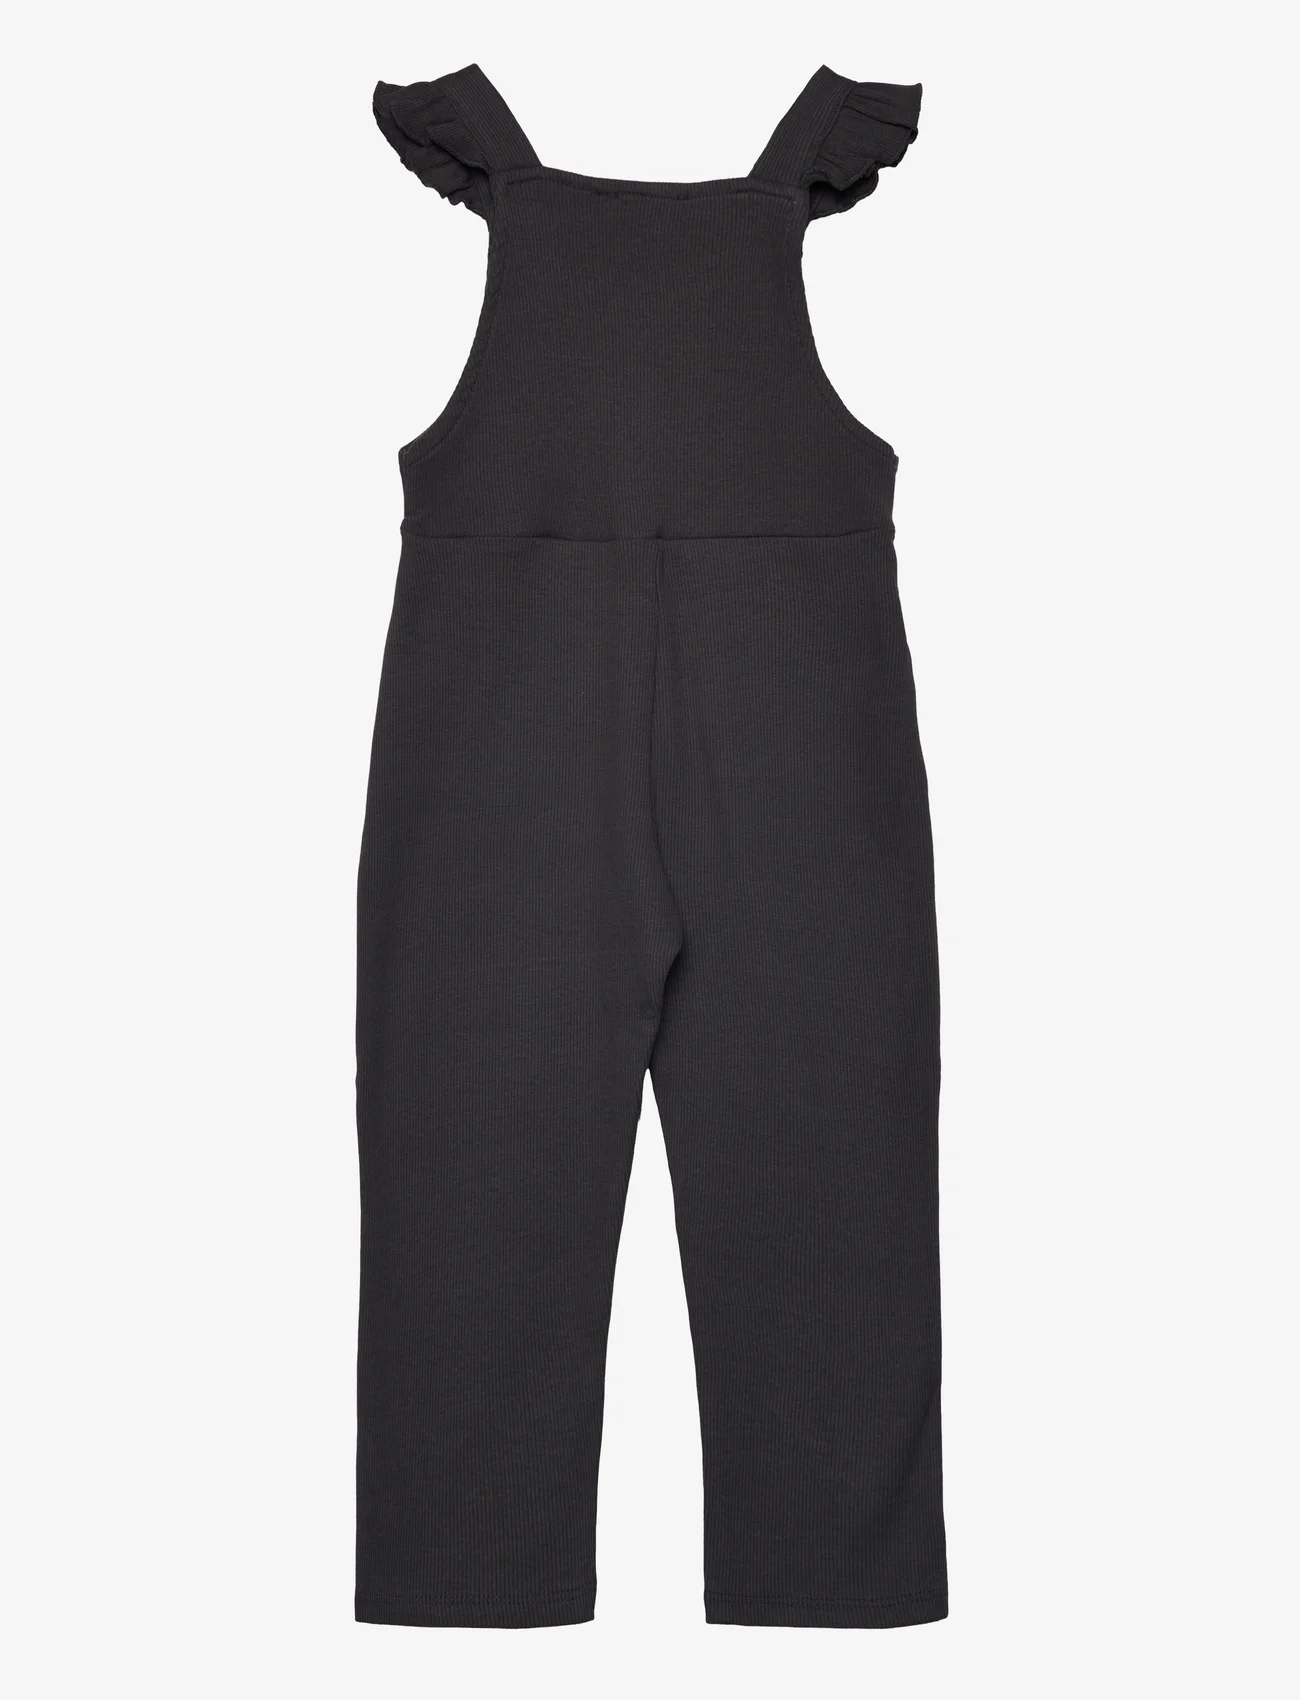 Mango - Cotton knit dungarees - sommarfynd - charcoal - 1